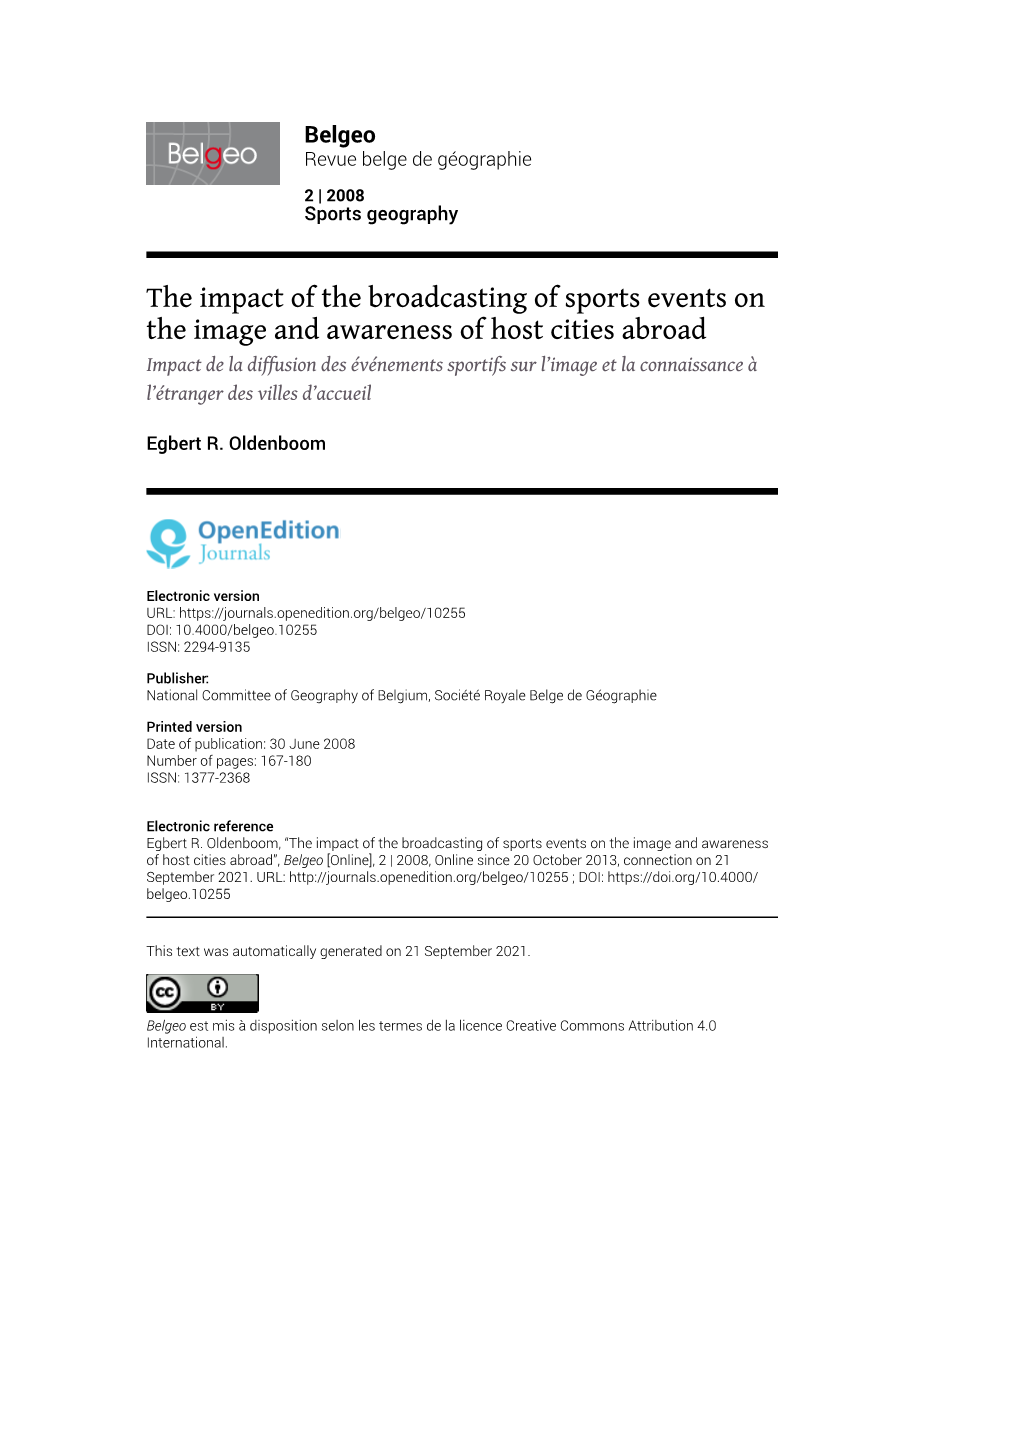 The Impact of the Broadcasting of Sports Events on the Image And